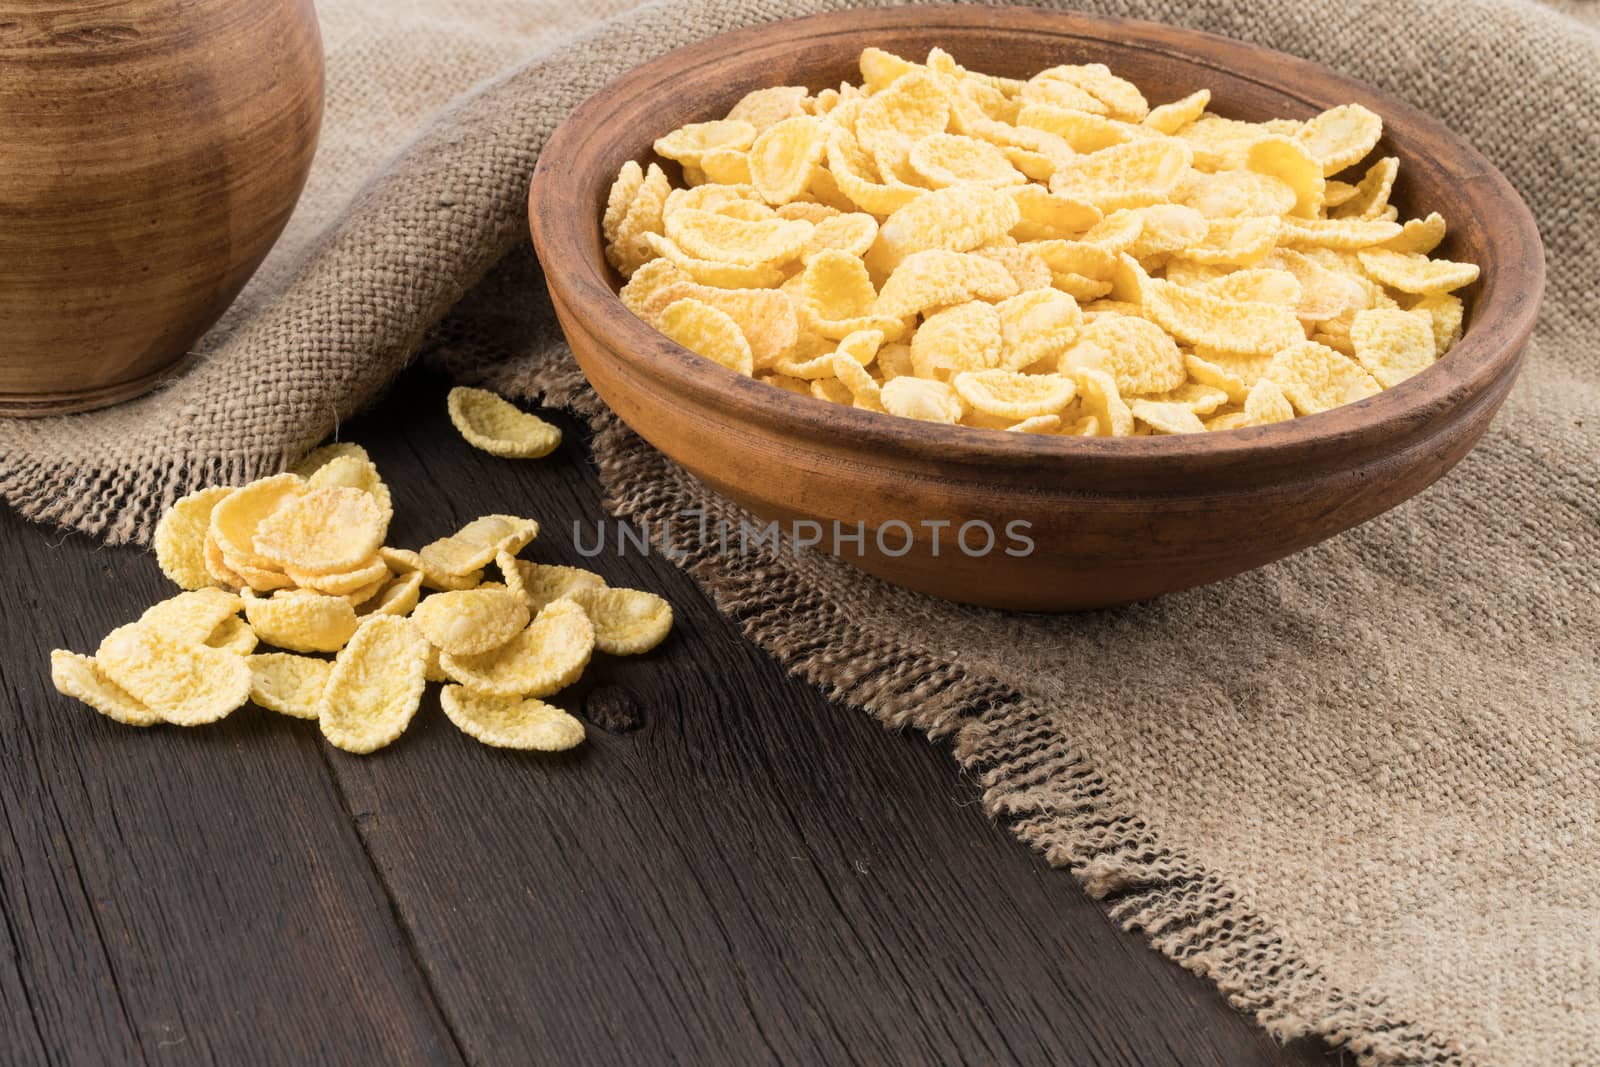 Corn flakes in ceramic bowl on the old wooden table. Selective focus.